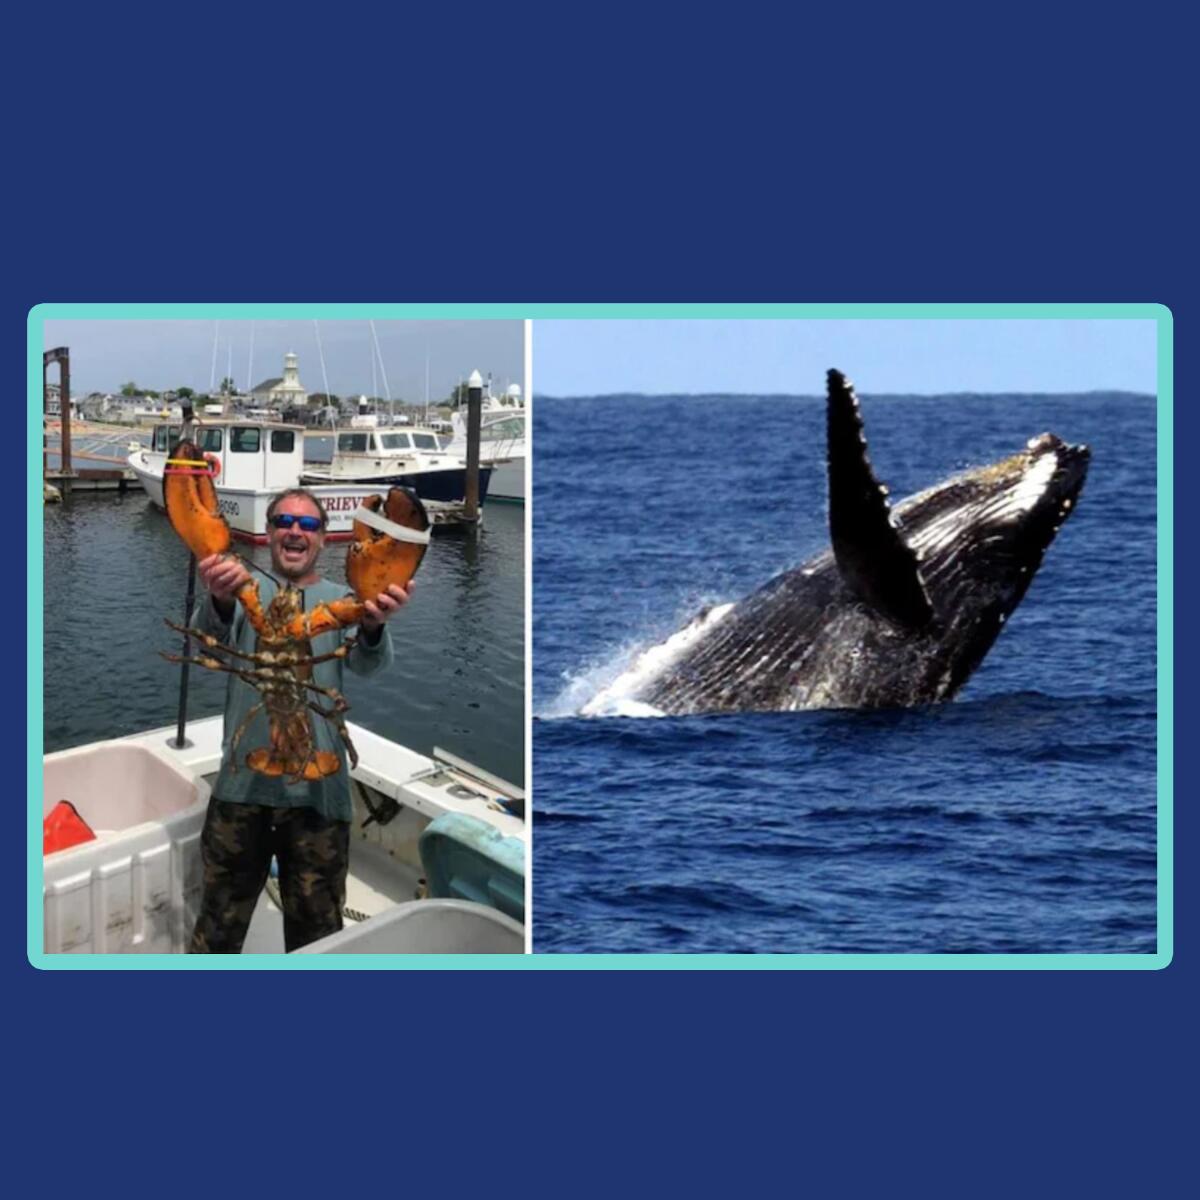 Photos of Michael Packard, left, and a humpback well mid-dive.